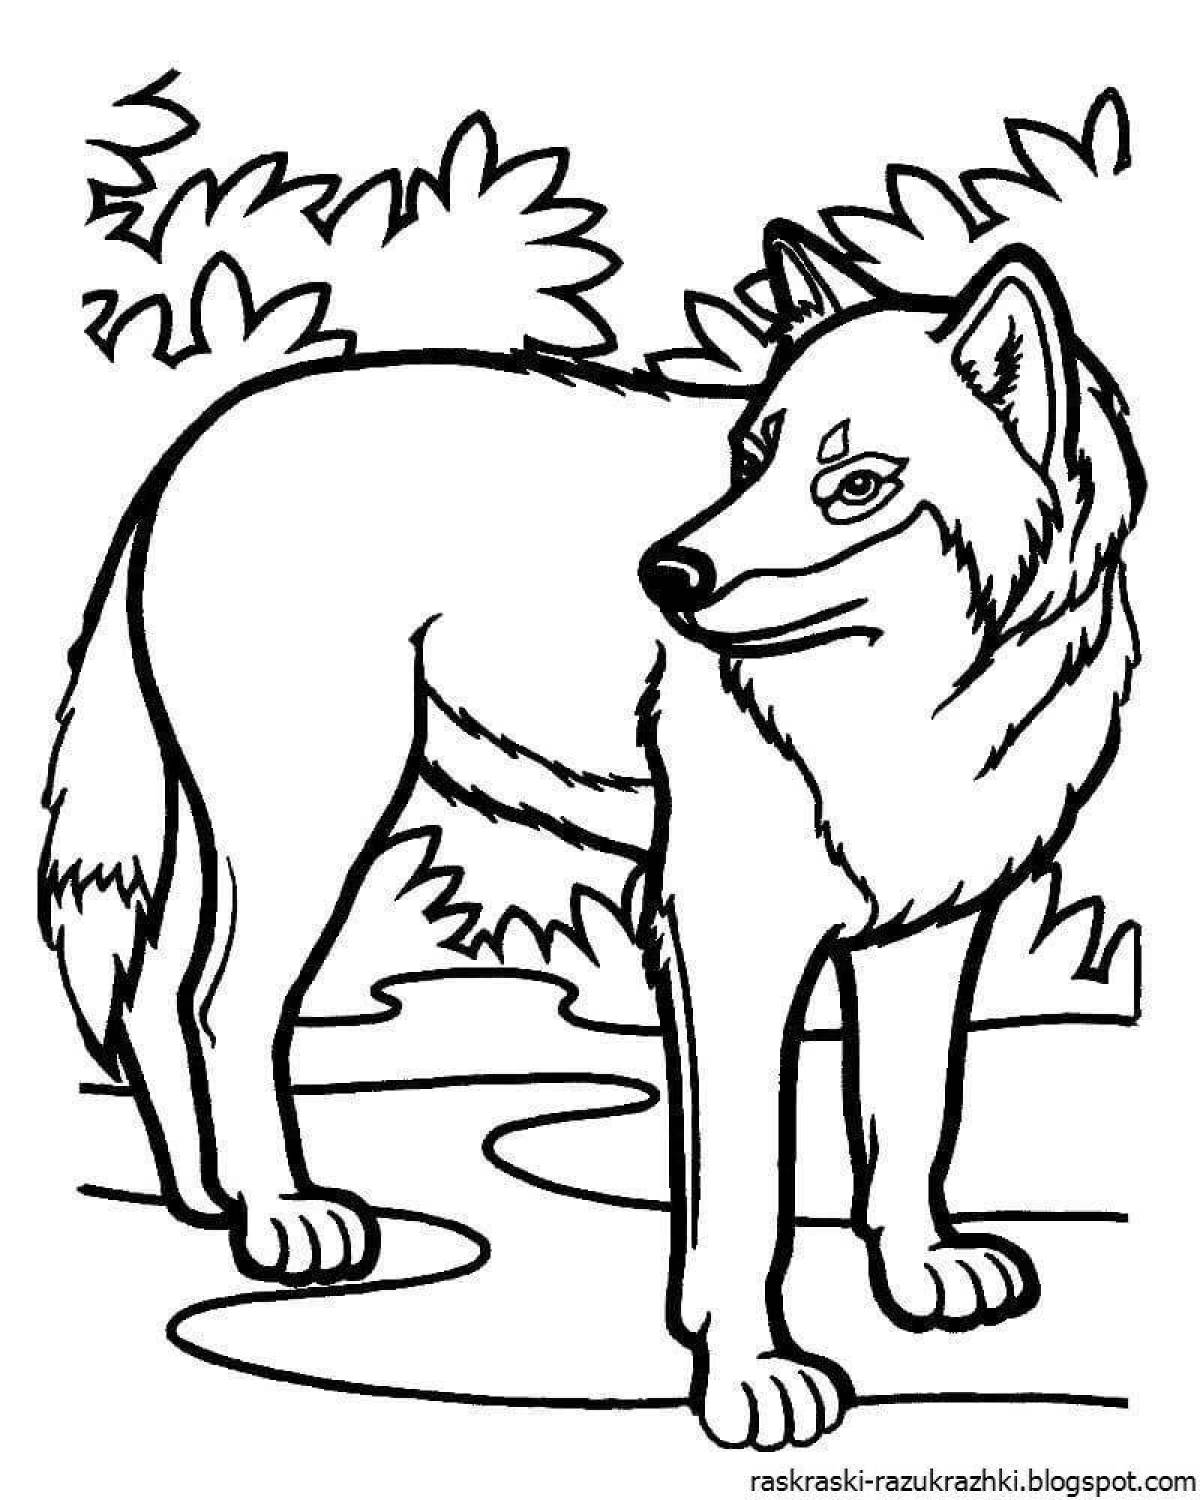 Wonderful legend wolf coloring book